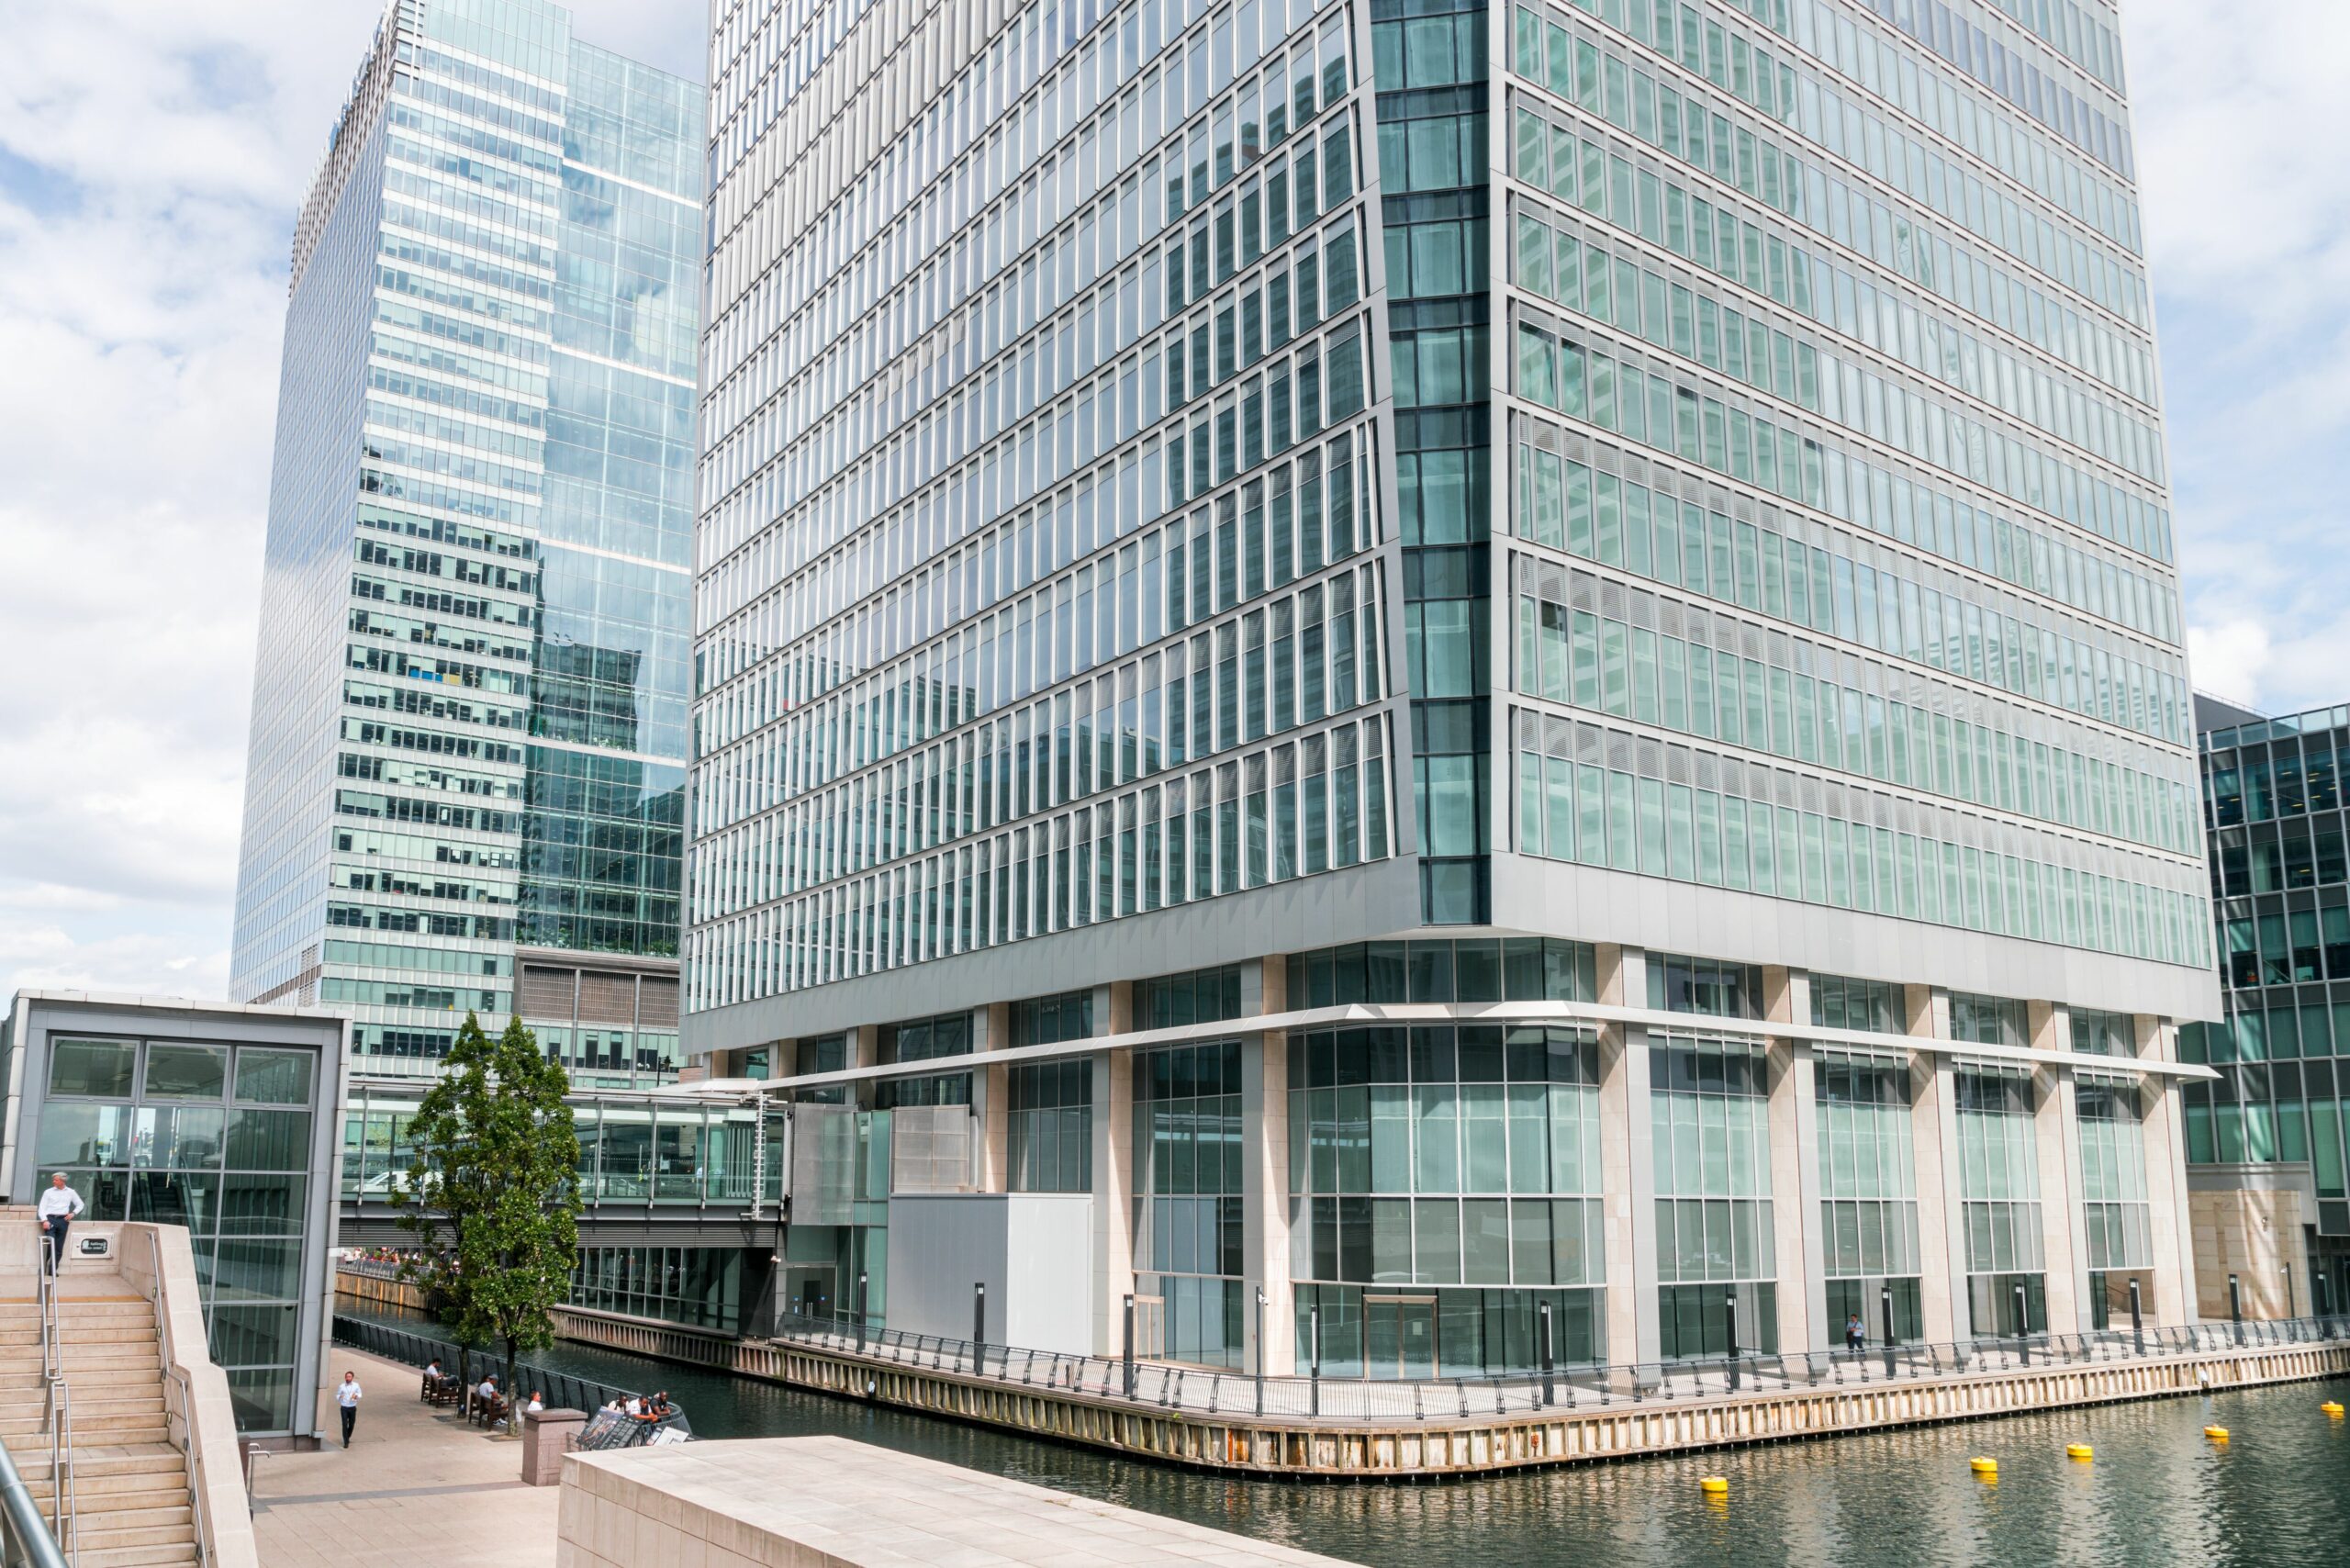 Cator Wells Expands Presence with New Headquarters in Canary Wharf, London